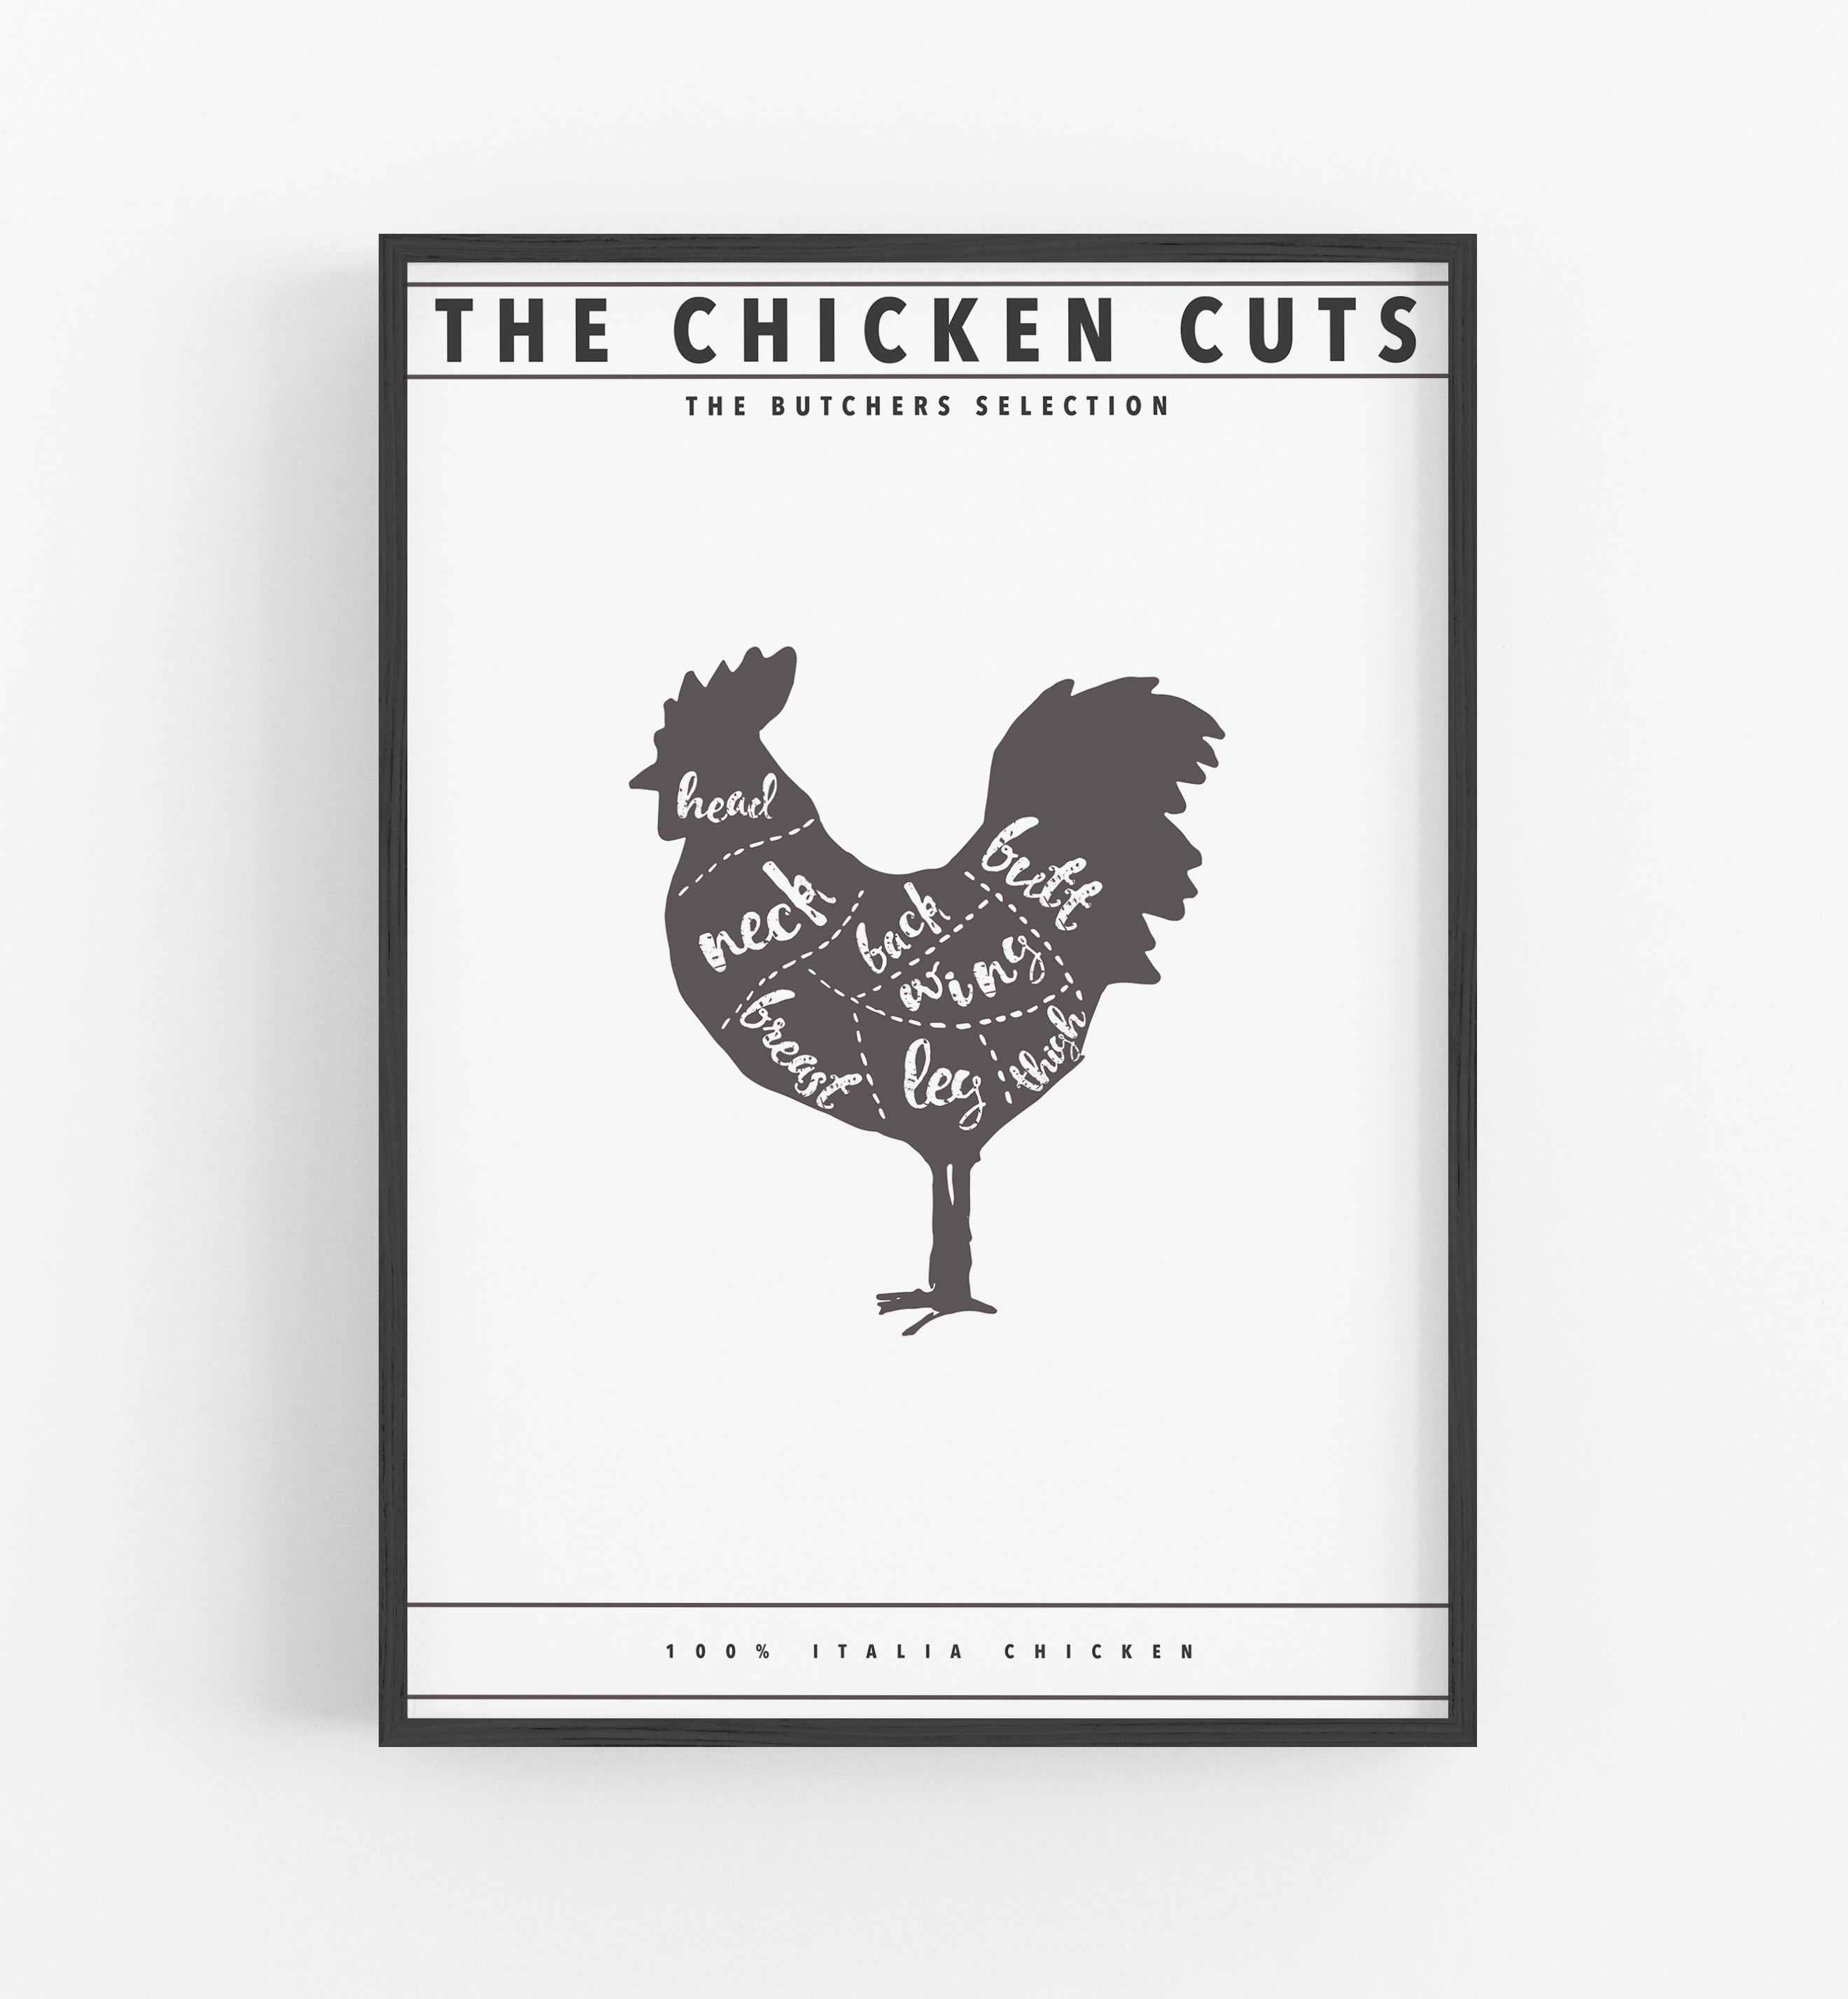 The chicken cuts